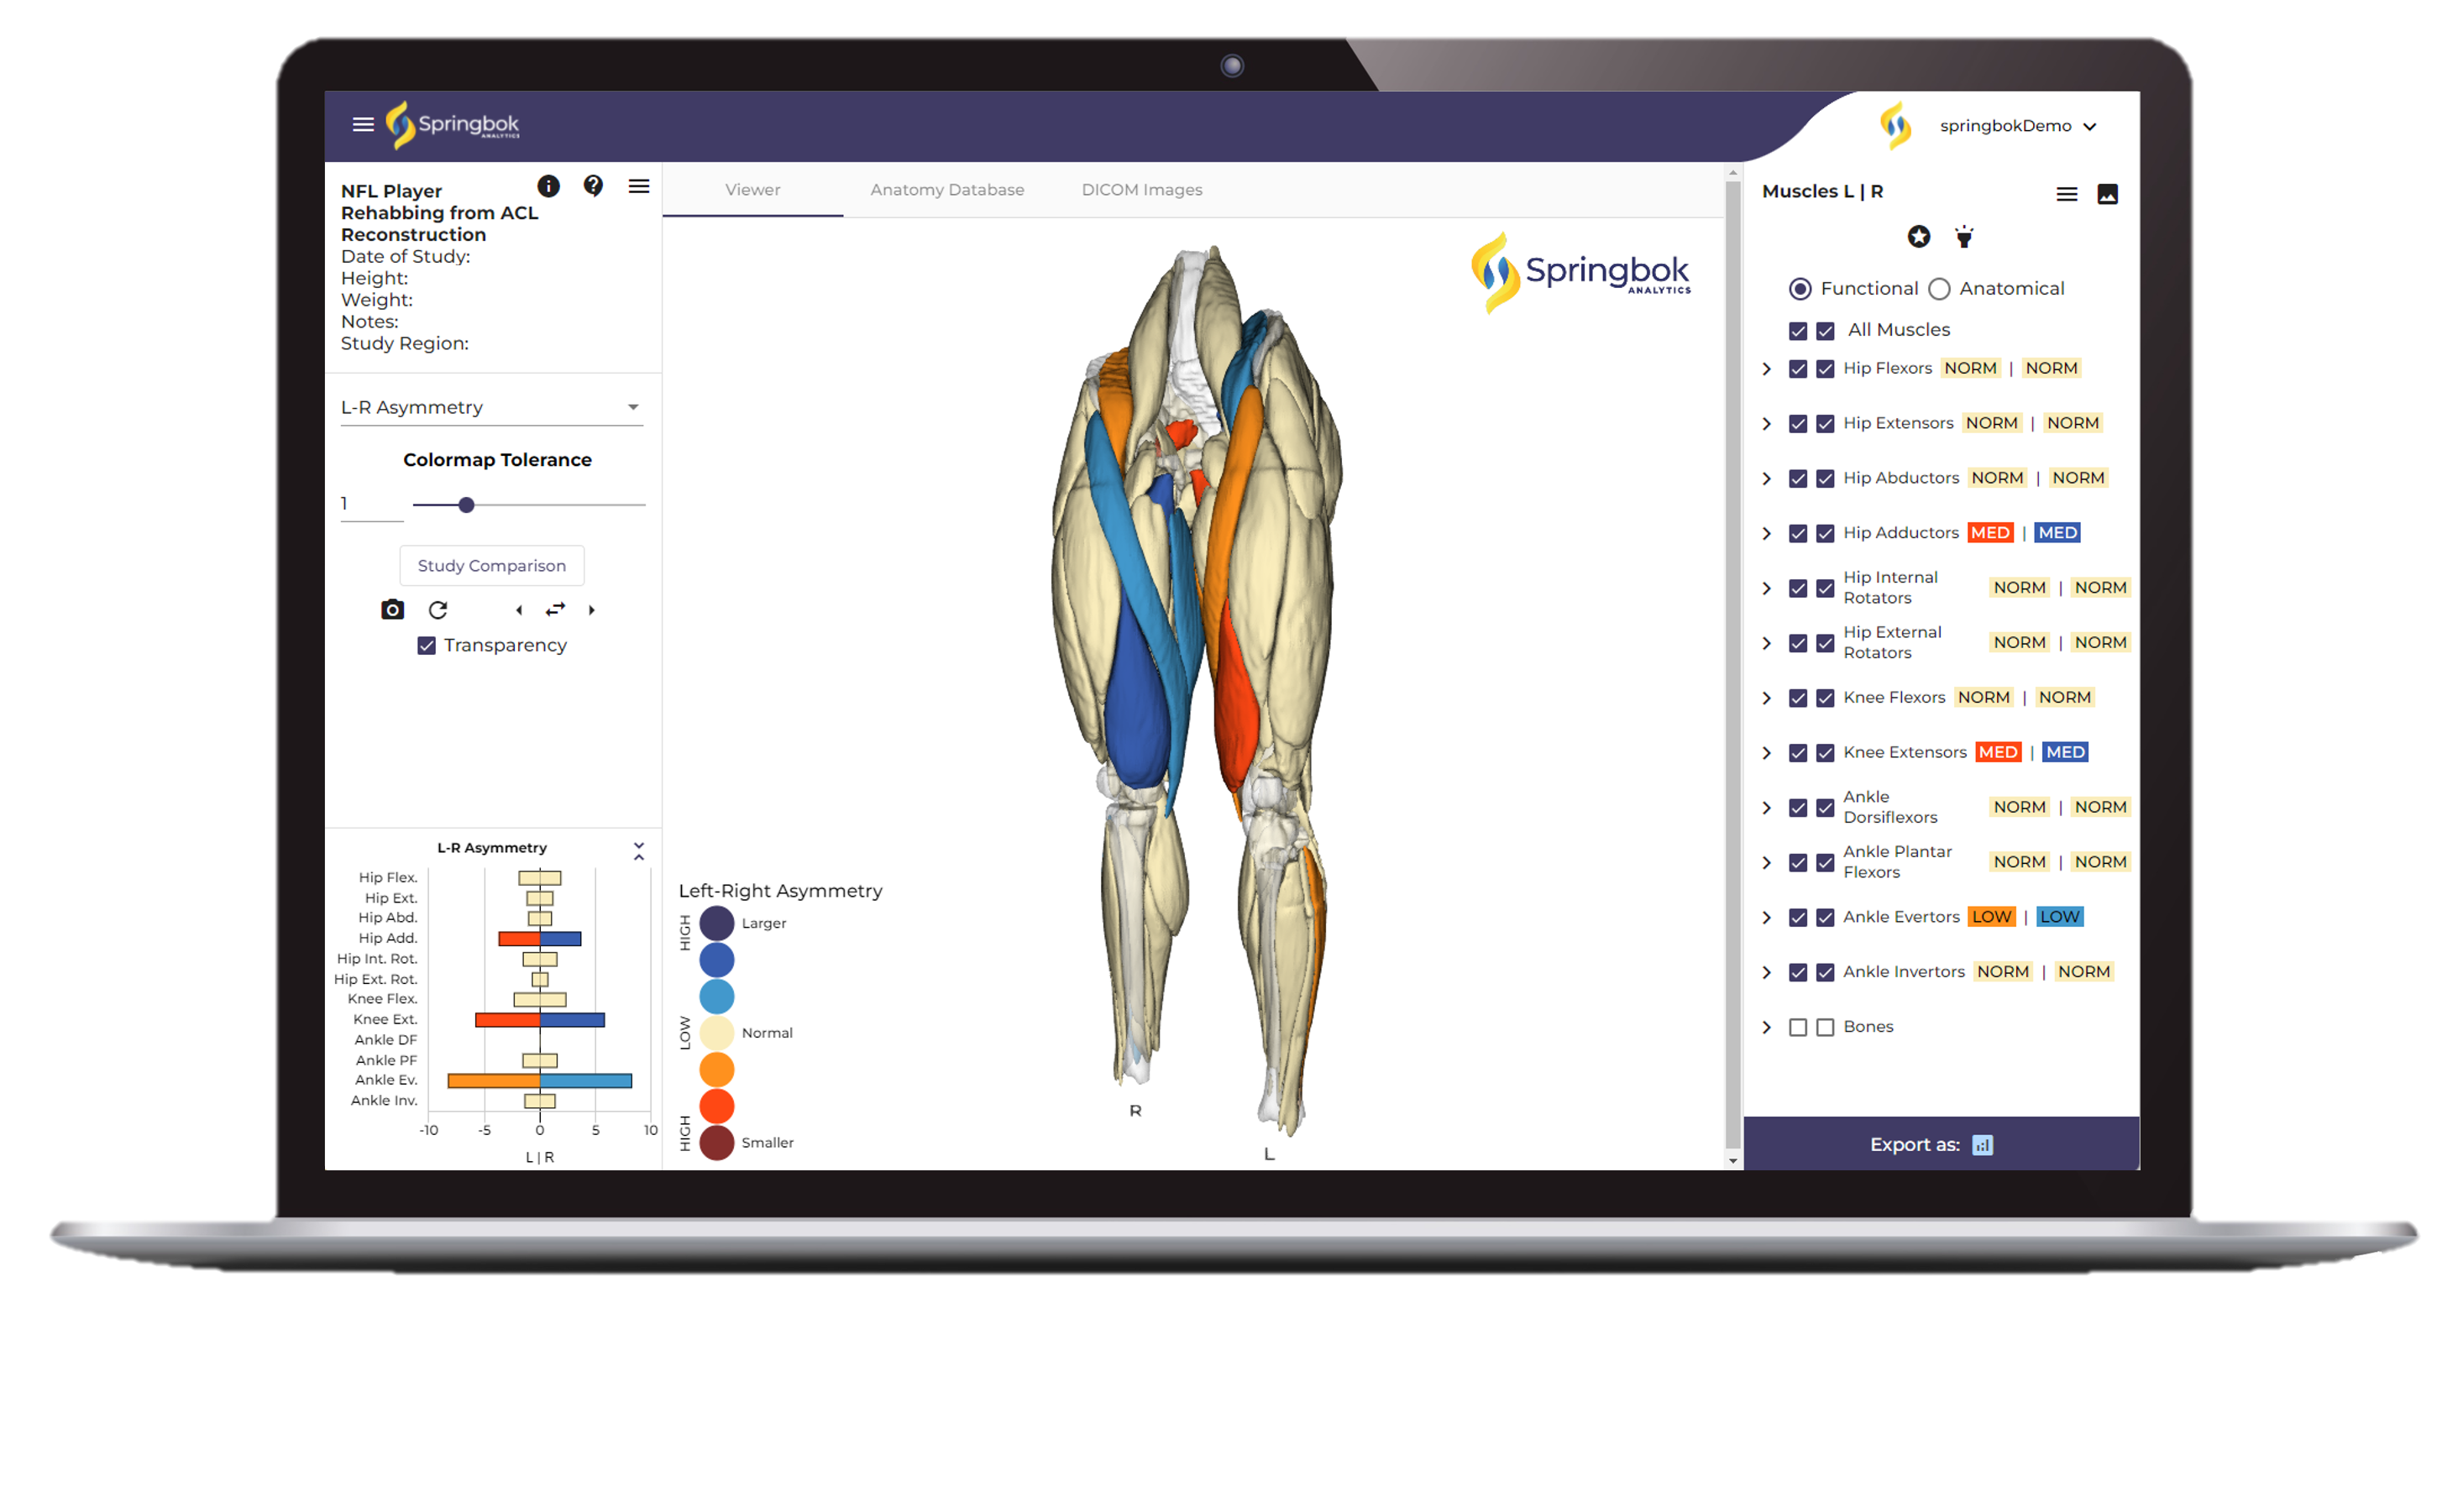 NMEs Technology - MOTUS Physical Therapy